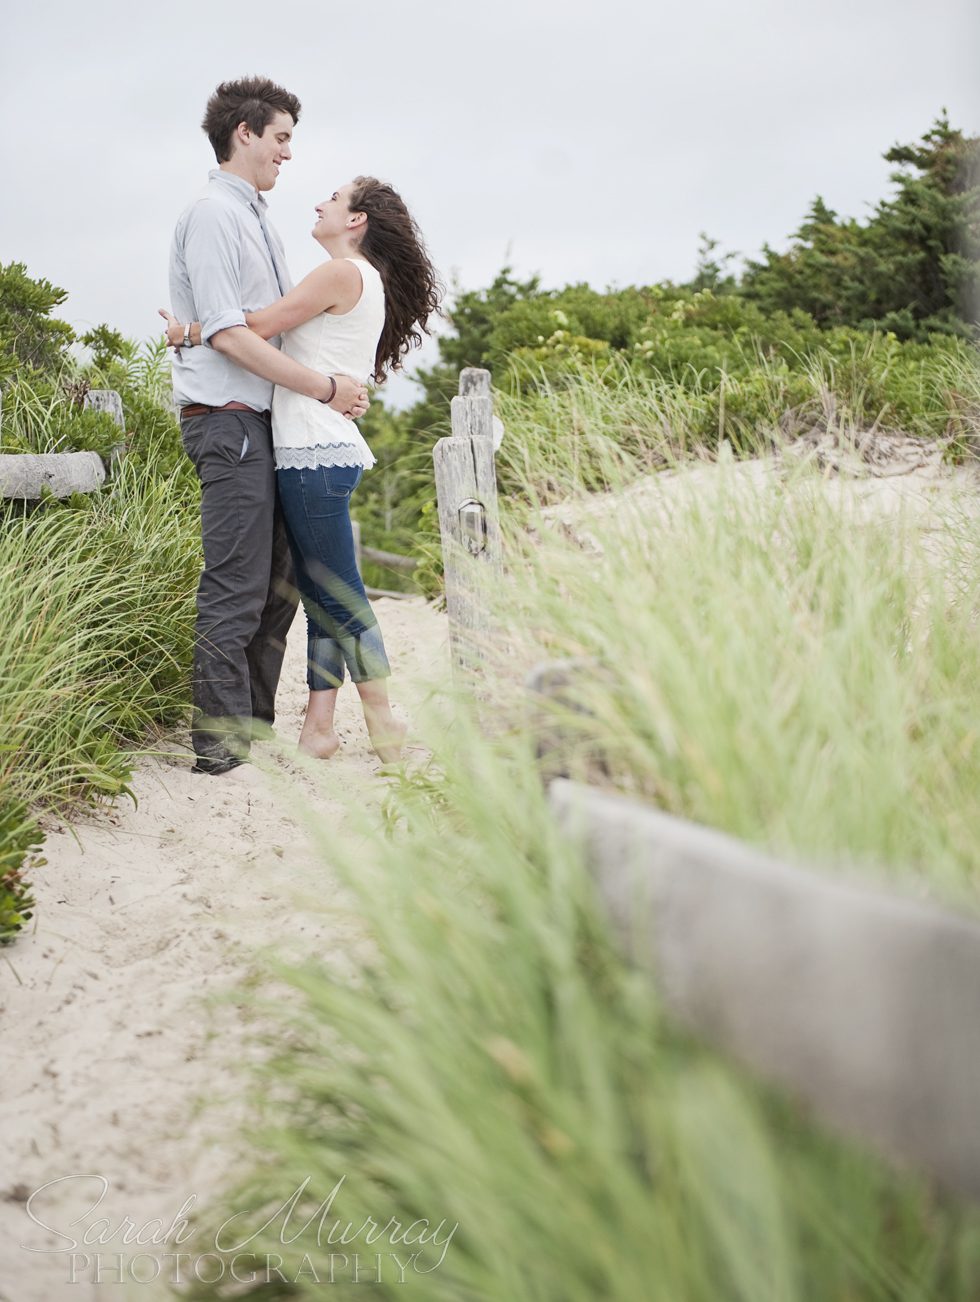 Hyannis Long Beach Engagement Session on Cape Cod - Sarah Murray Photography